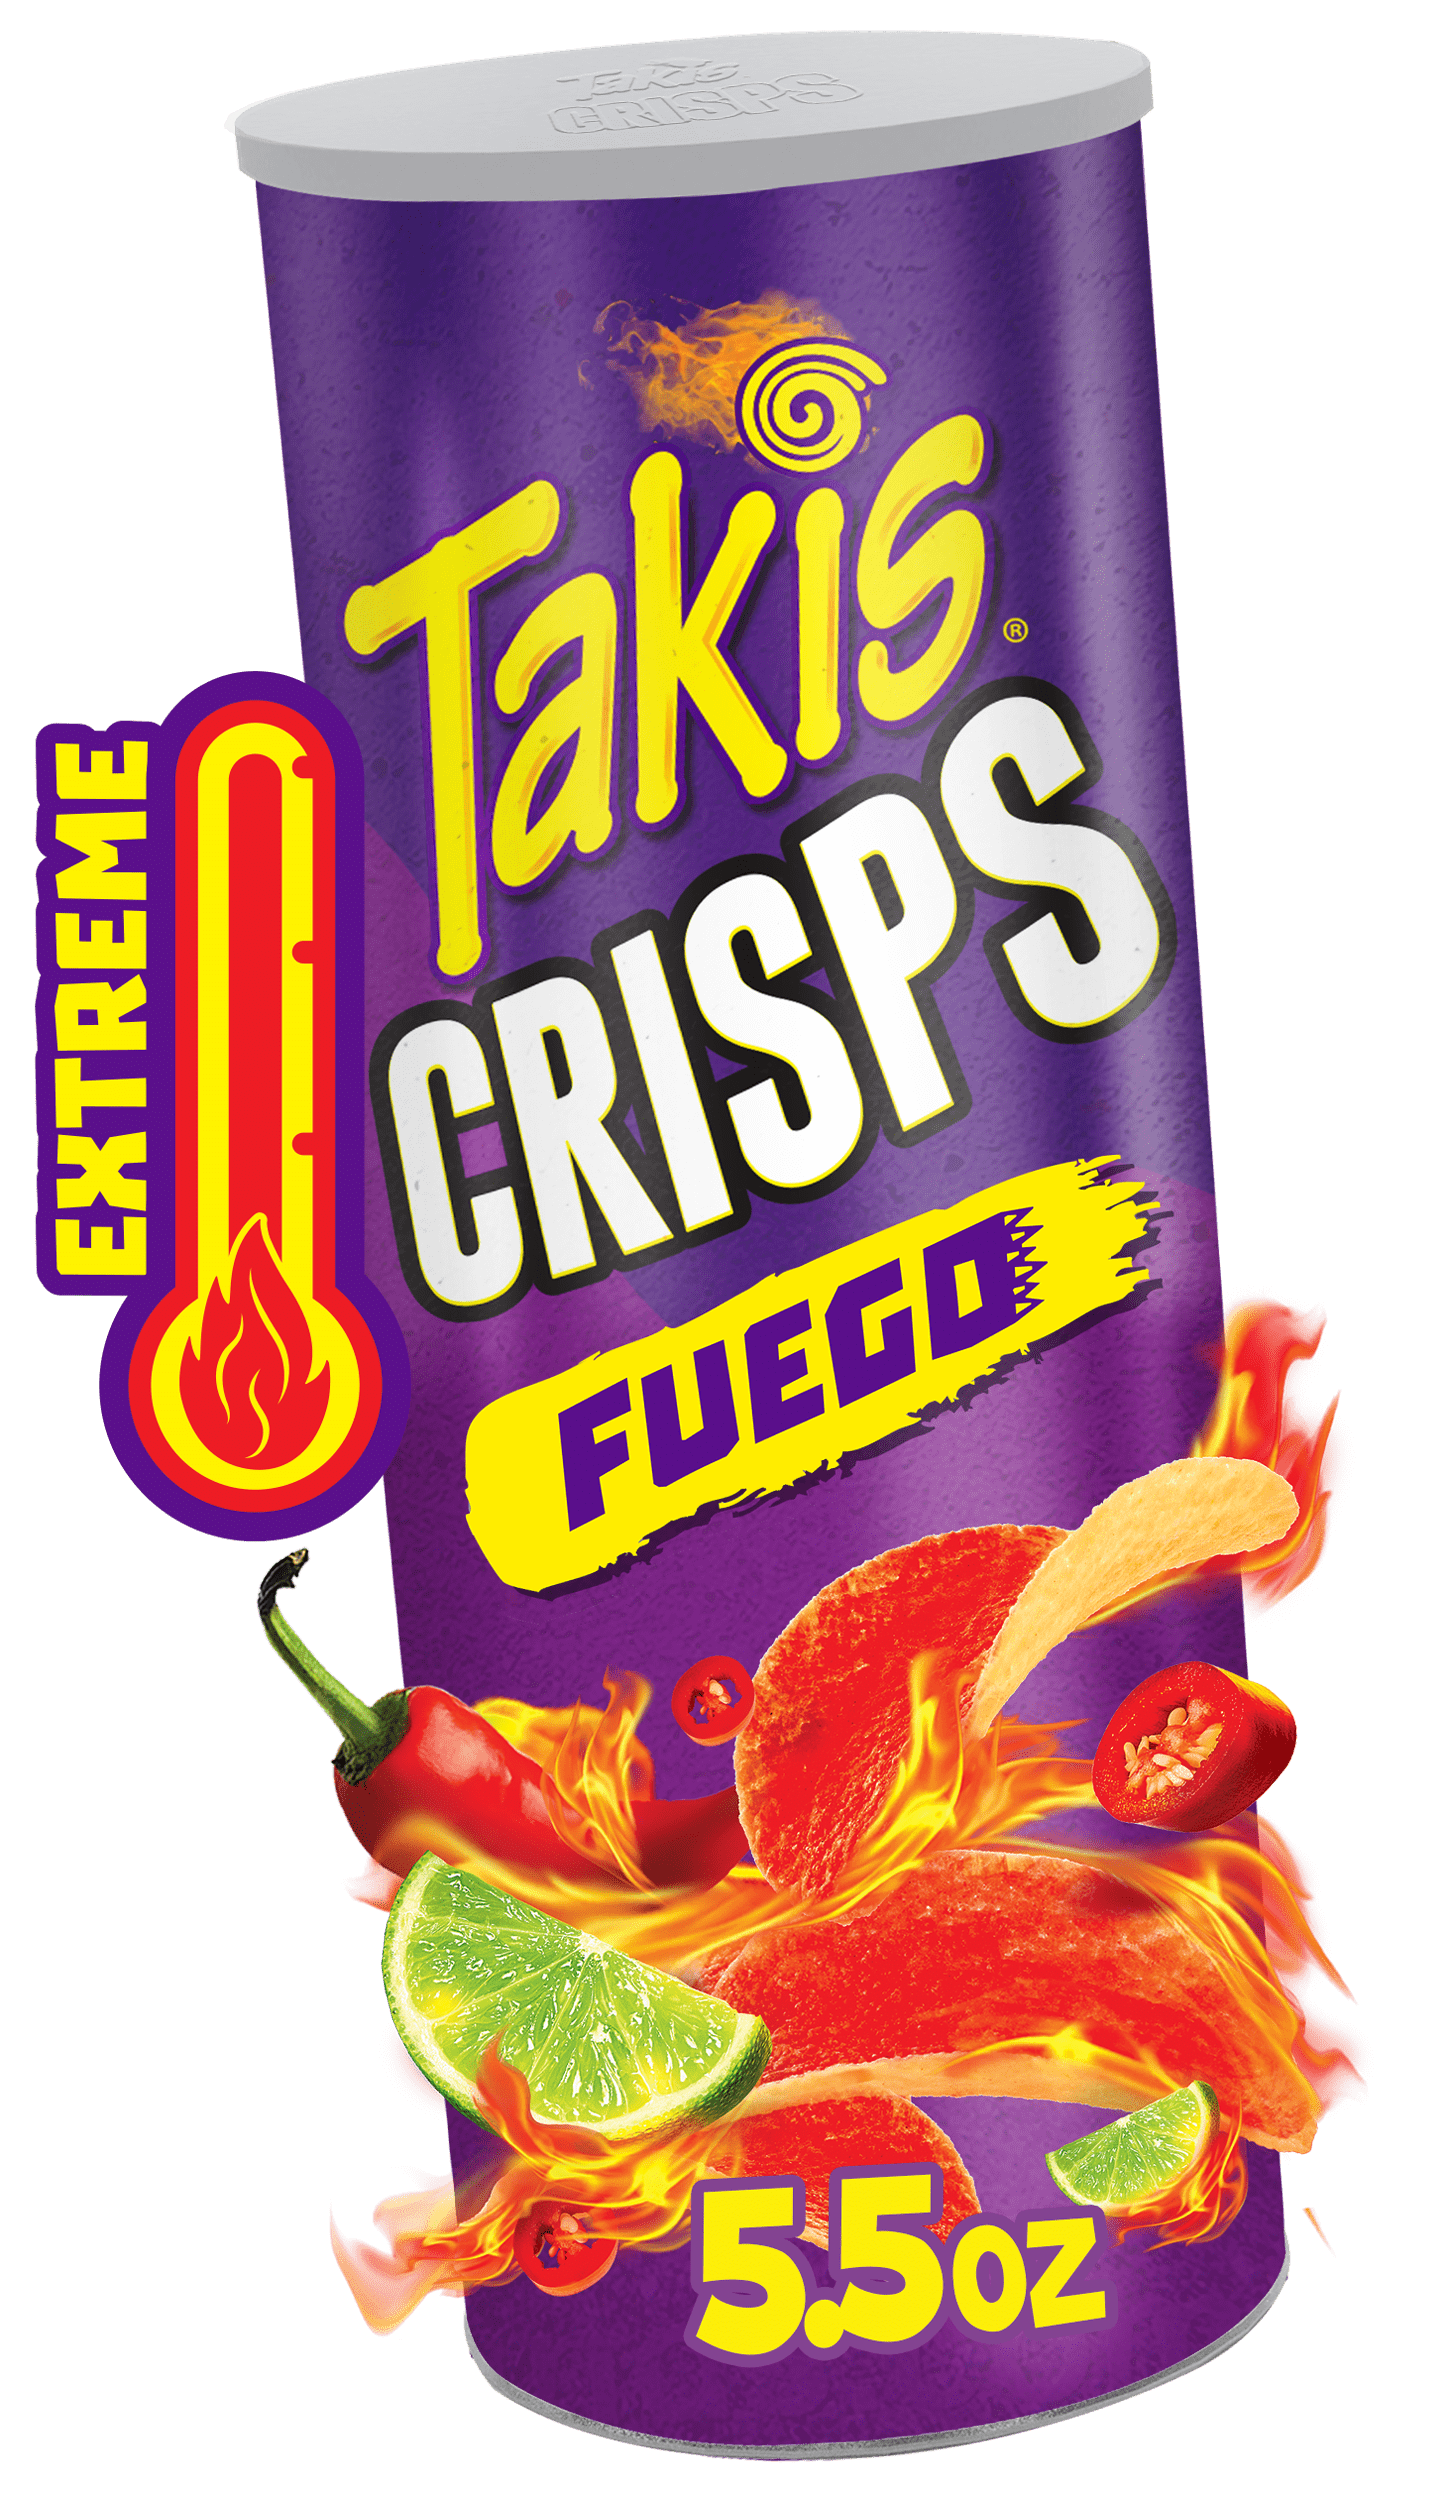 Takis Fuego Spicy Rolled Tortilla Chips Snack Size Bag 3.25 oz